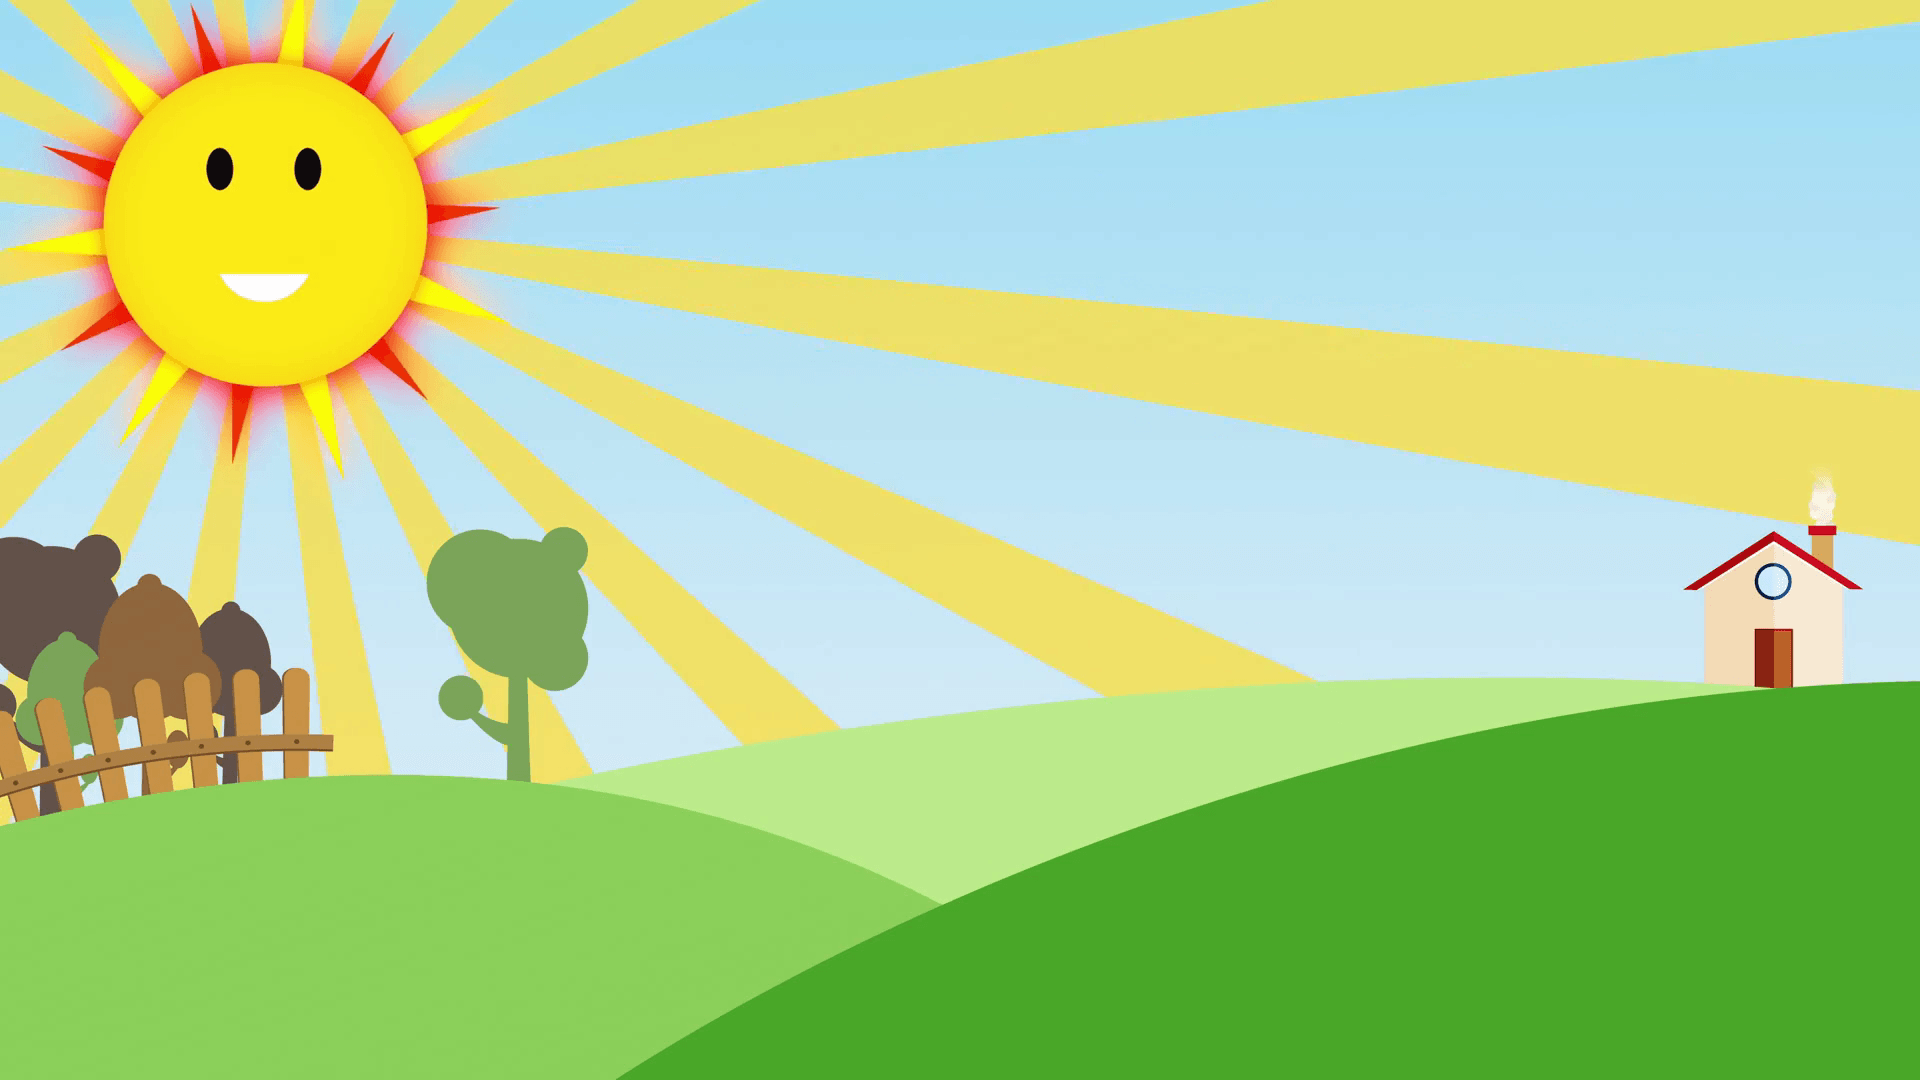 Nature Background For Kids With Smiling Sun seamless loop. Nice